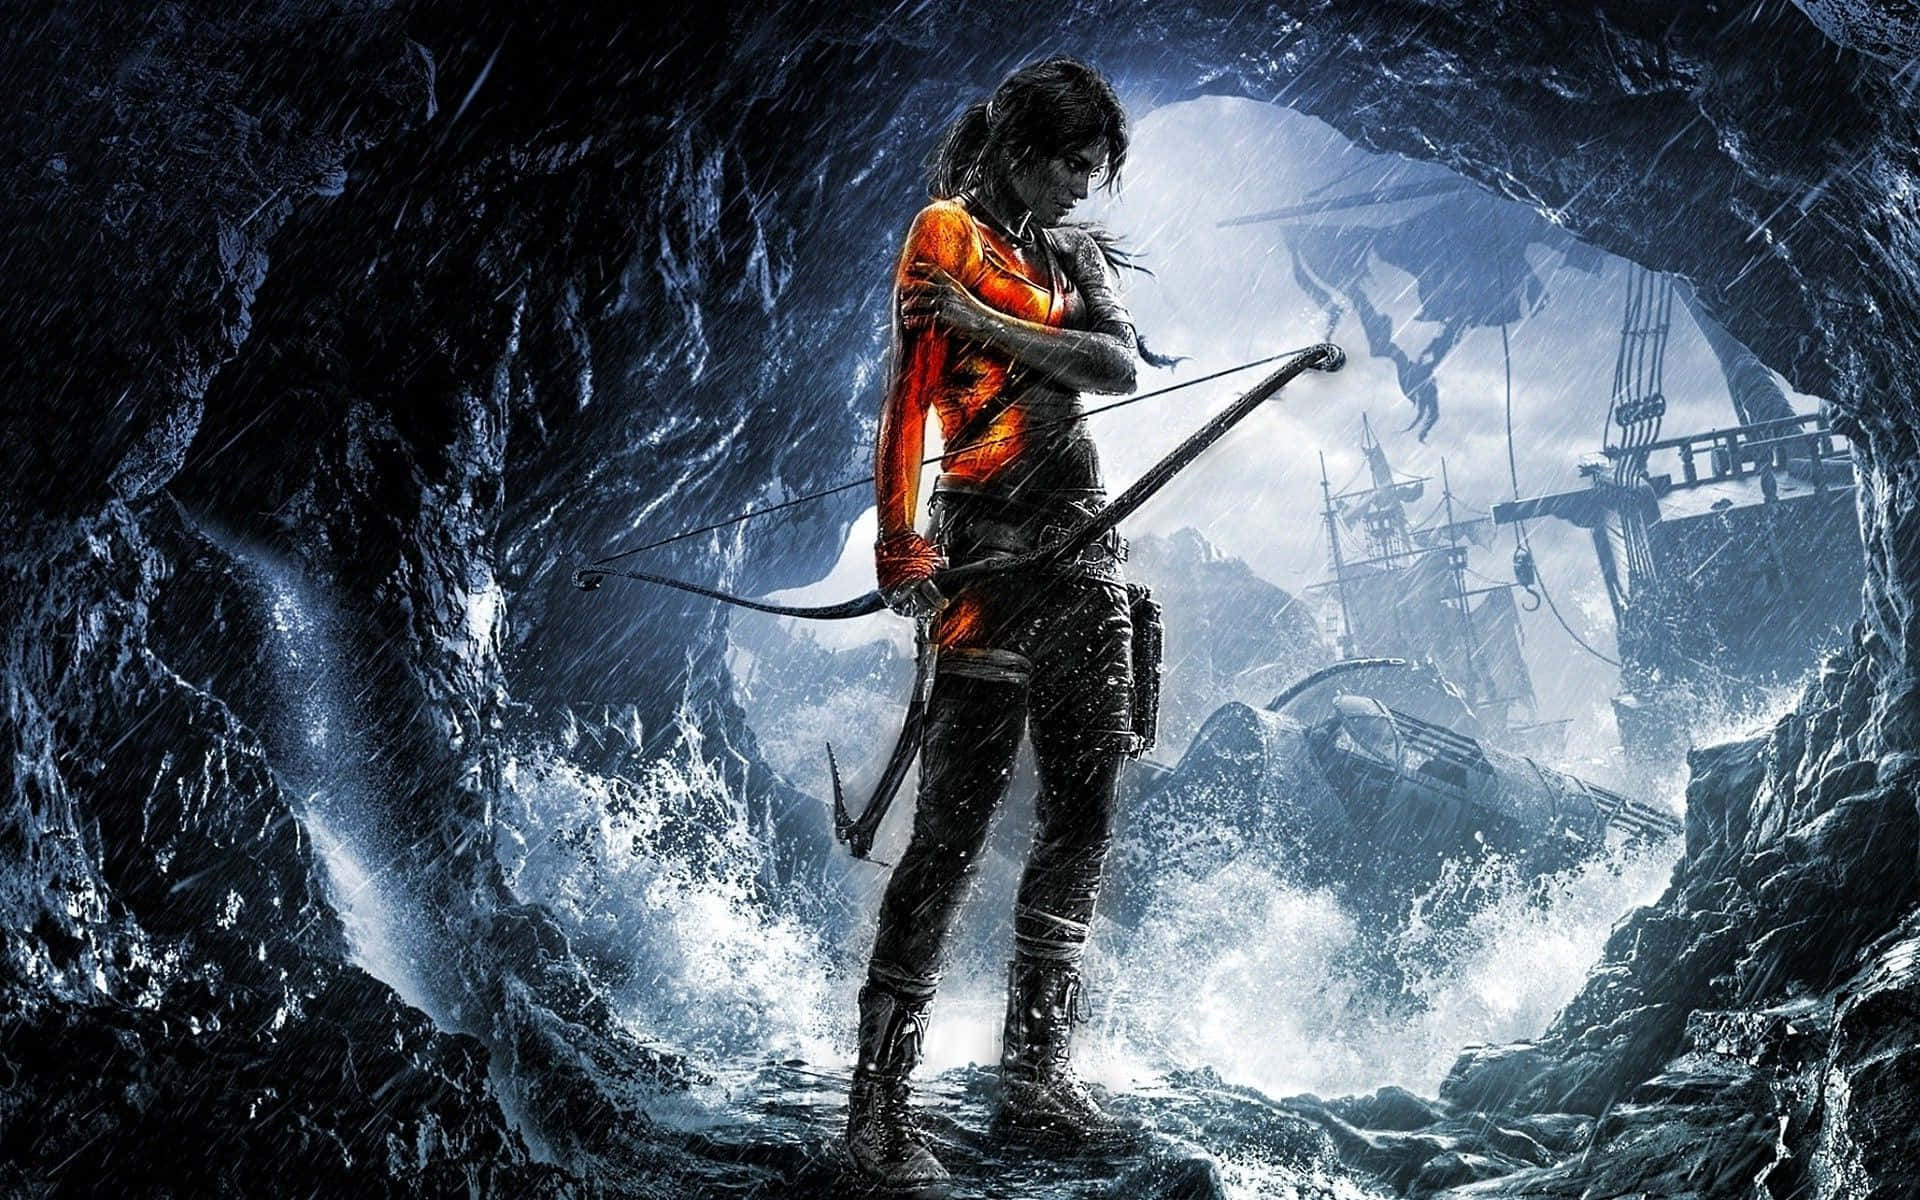 Lara Croft stands triumphant over her foes in Rise of the Tomb Raider Wallpaper